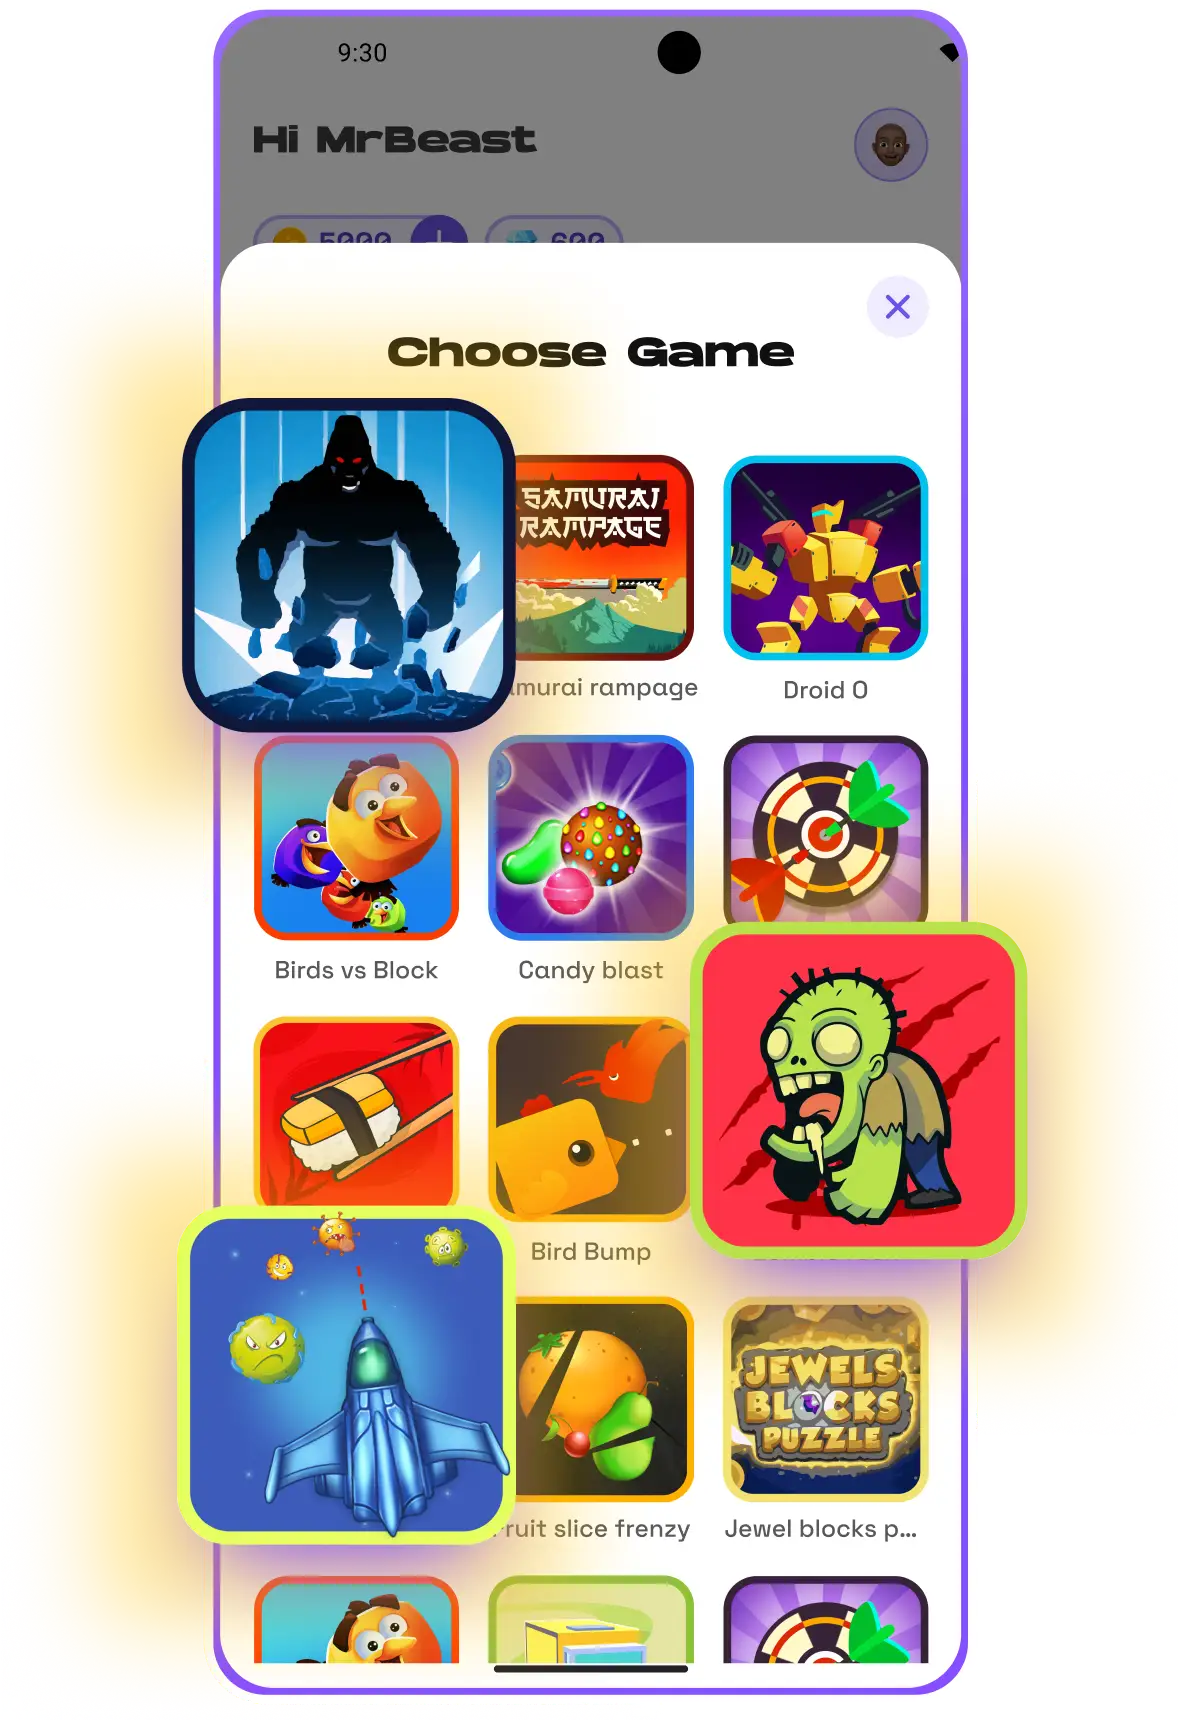 Best games on the app store with no ads & endless game play